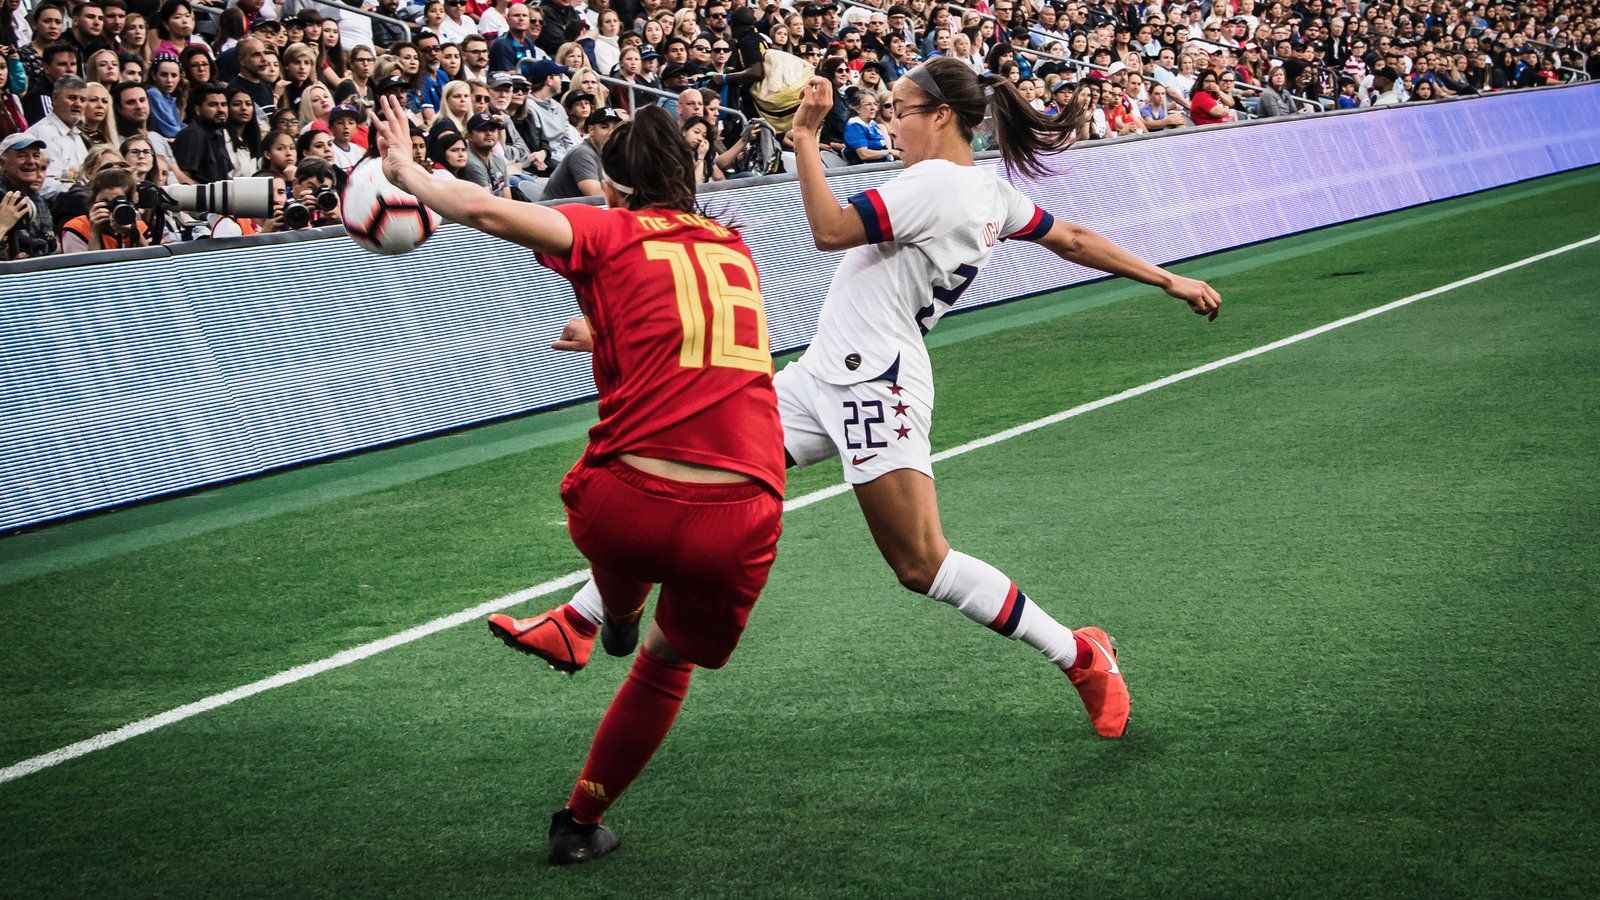 The Best Women's Soccer Team in the World Fights for Equal Pay